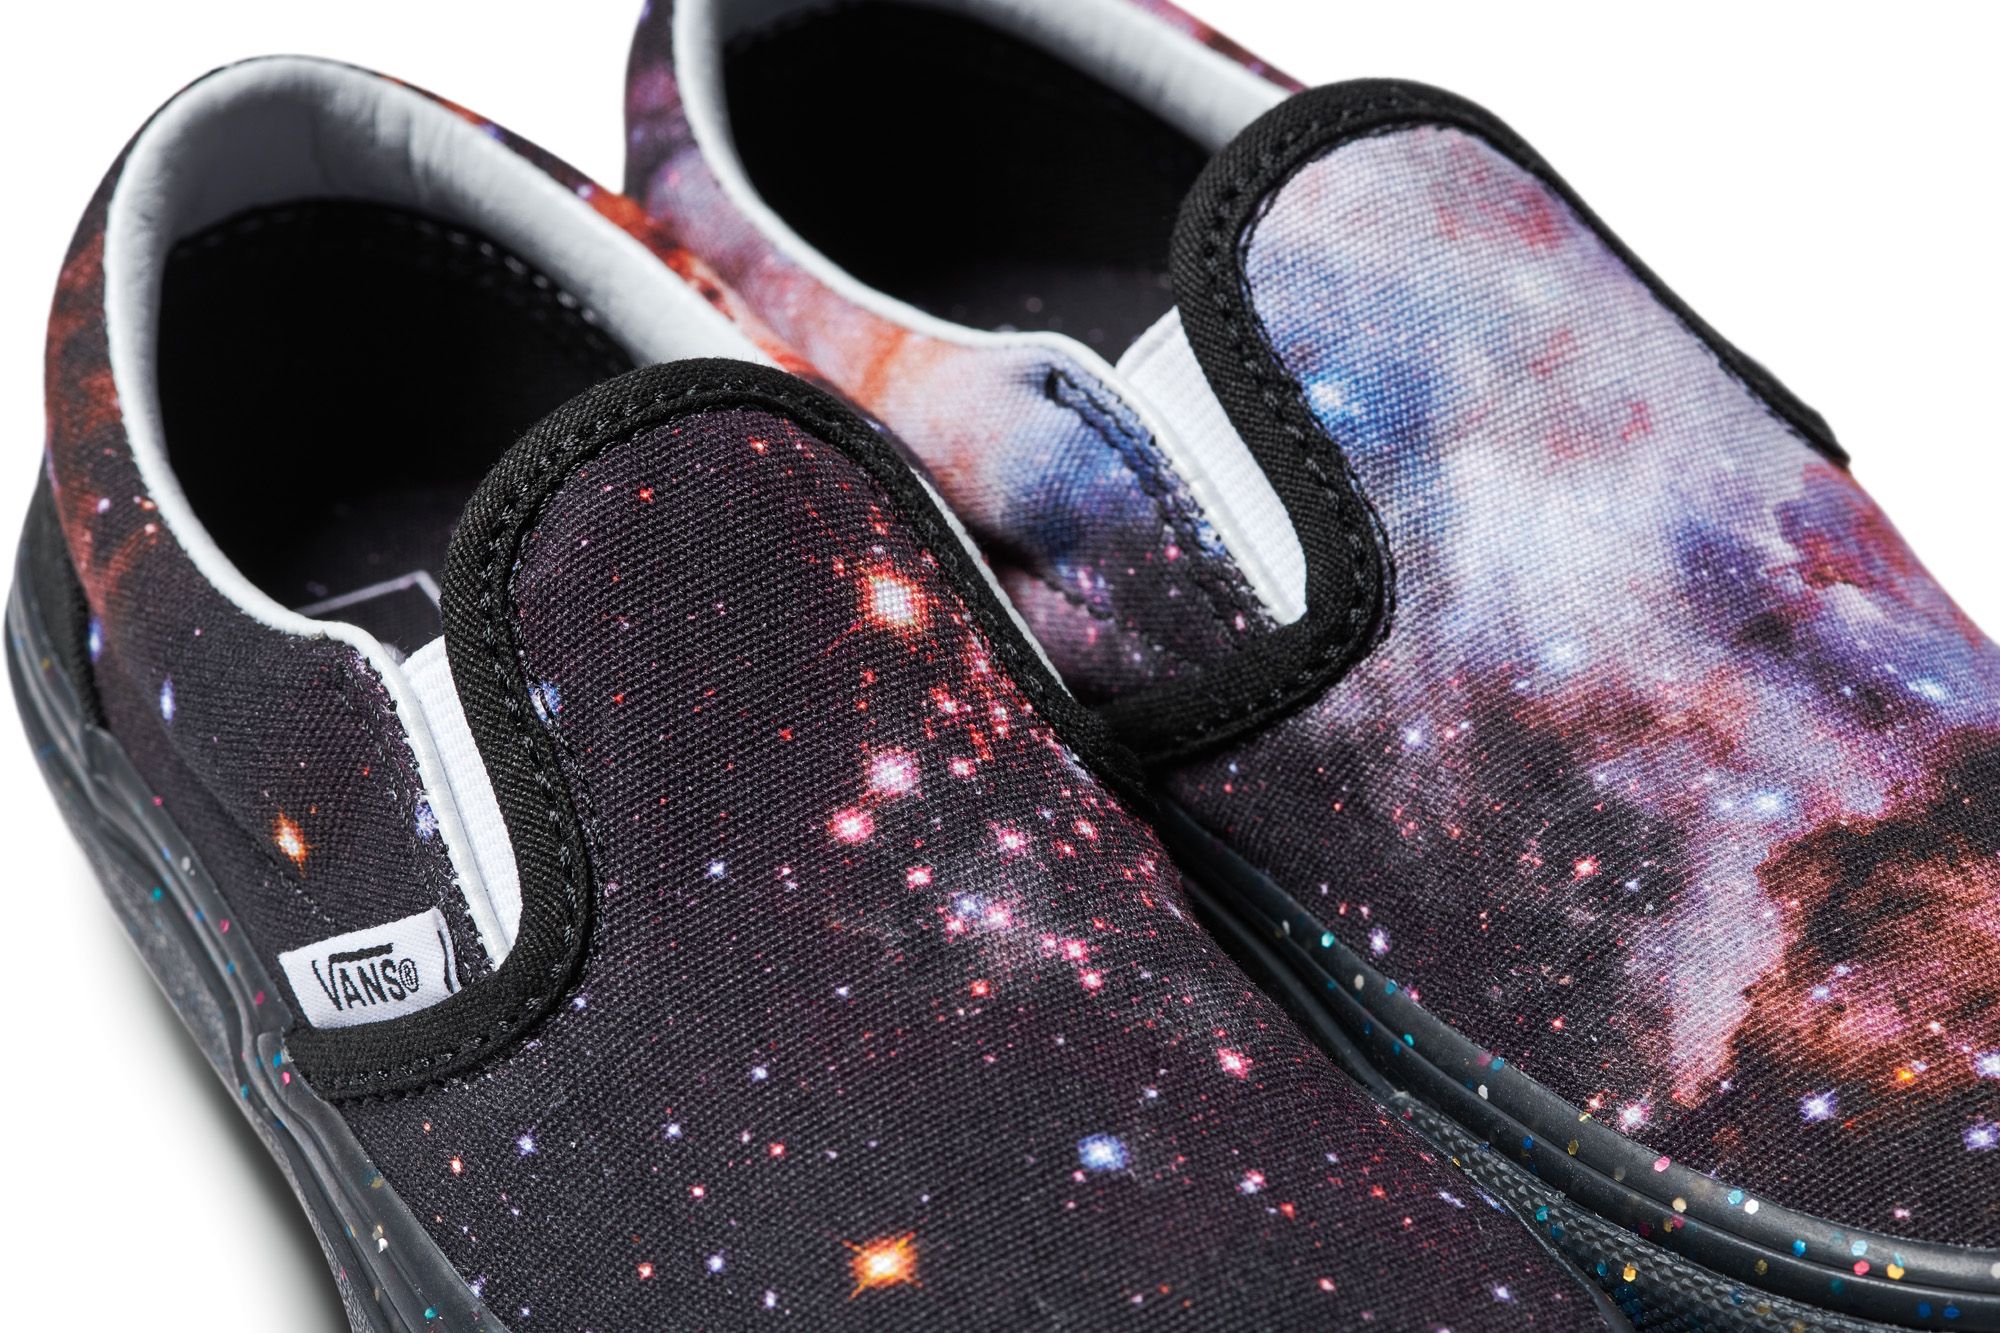 Vans x NASA Space Voyager Sneaker and Collection